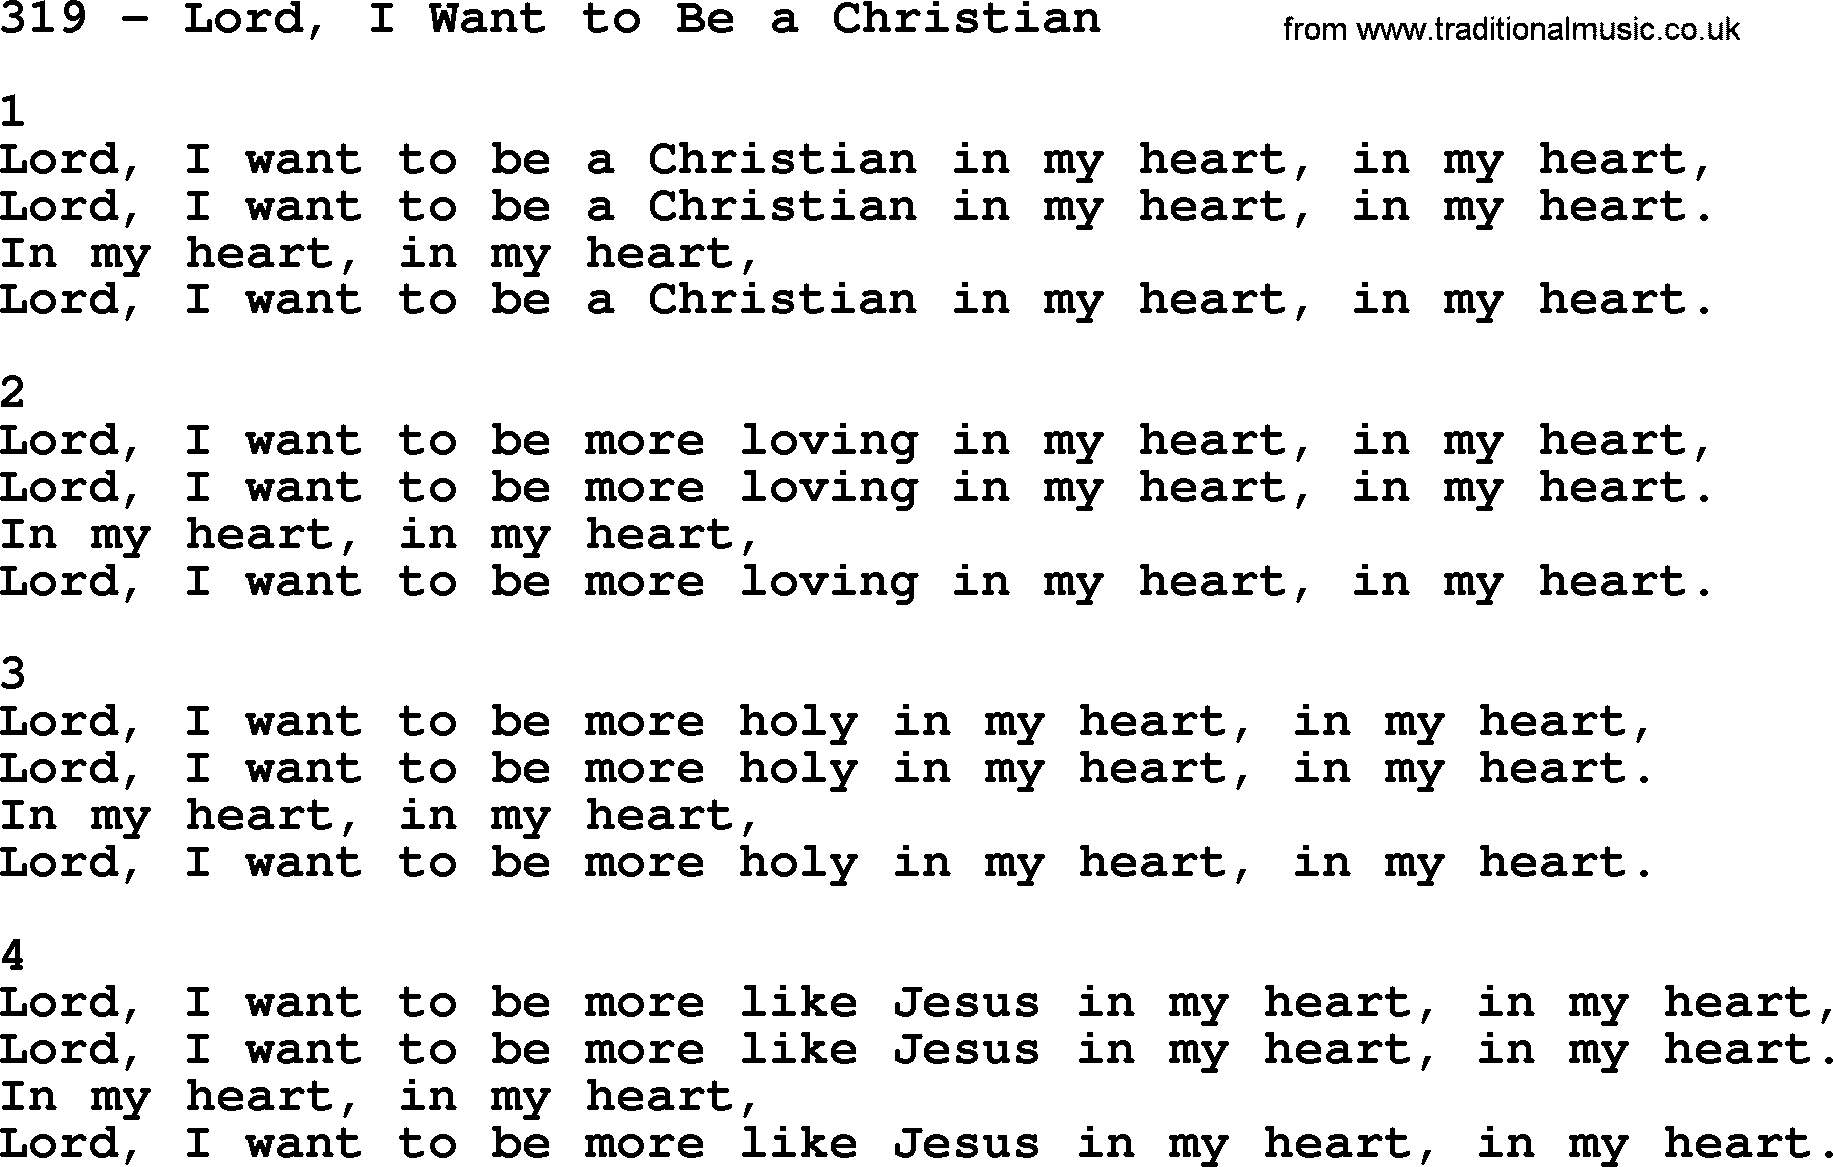 Complete Adventis Hymnal, title: 319-Lord, I Want To Be A Christian, with lyrics, midi, mp3, powerpoints(PPT) and PDF,